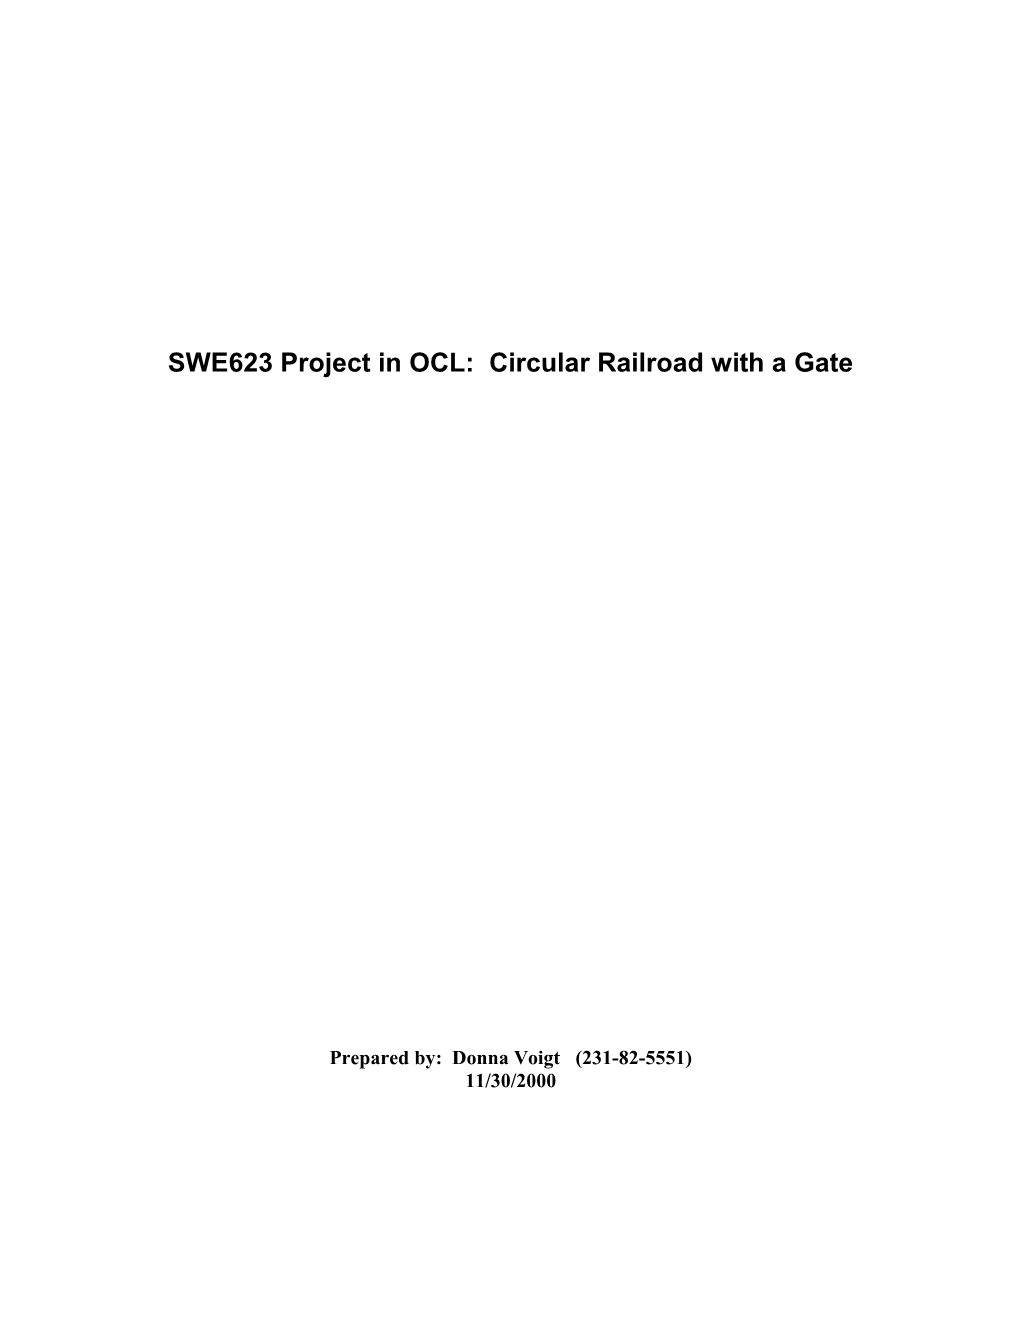 SWE623 Project in OCL: Circular Railroad with a Gate